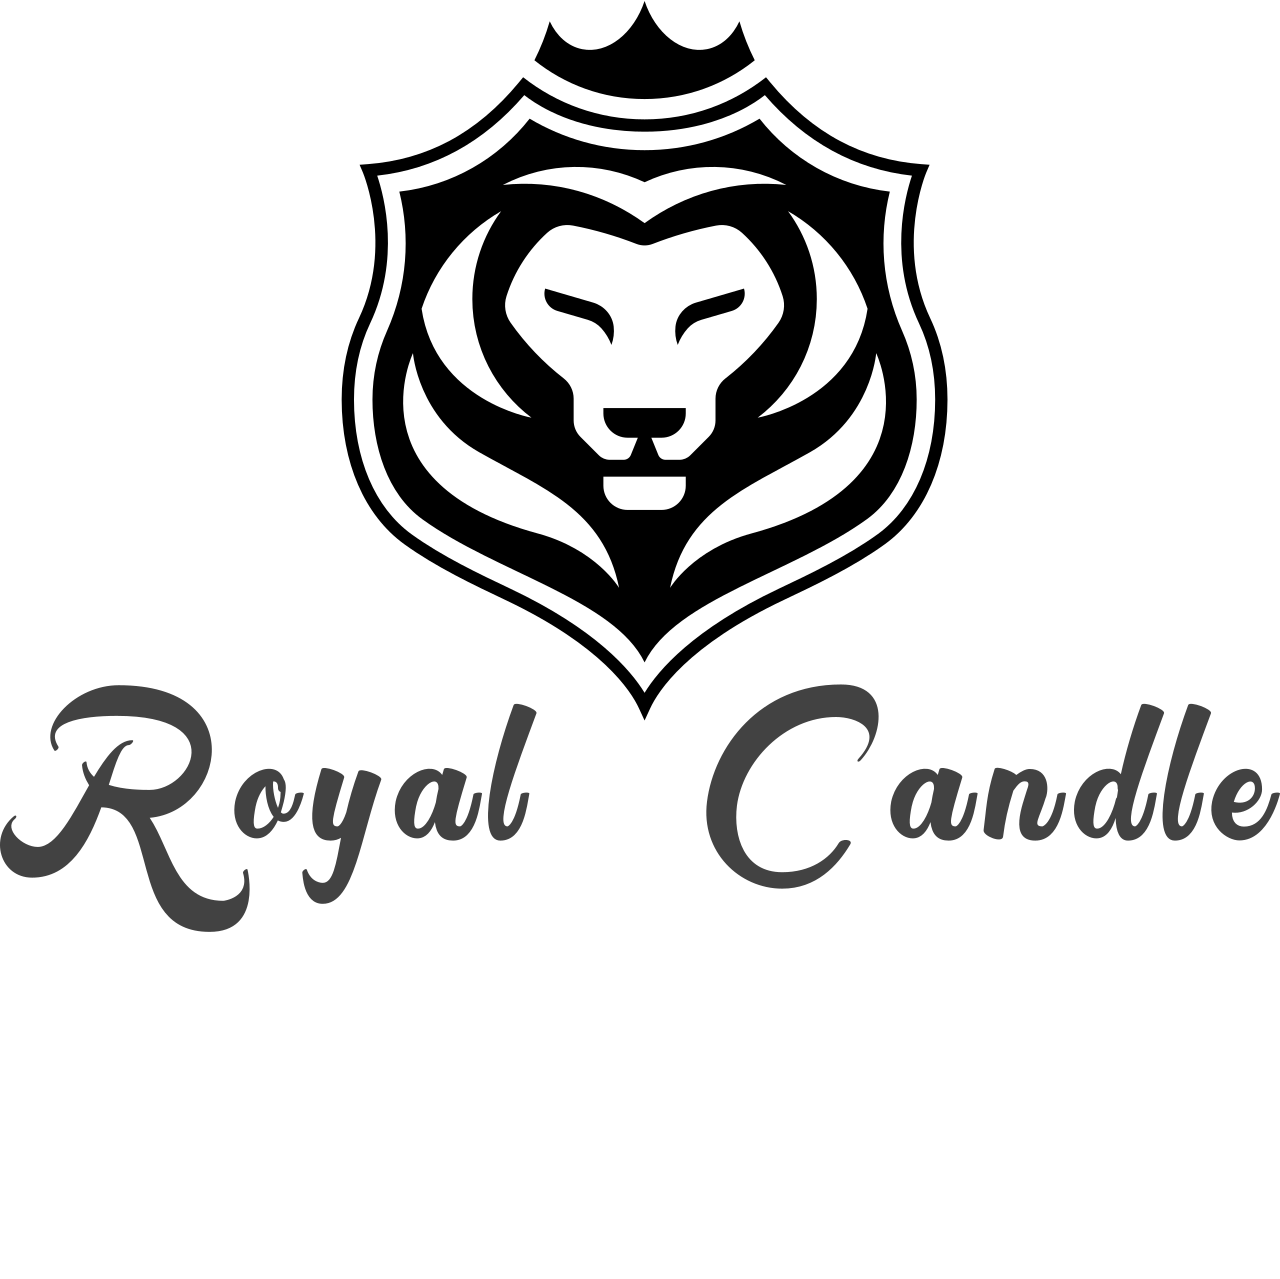 Royal   Candle 's web page